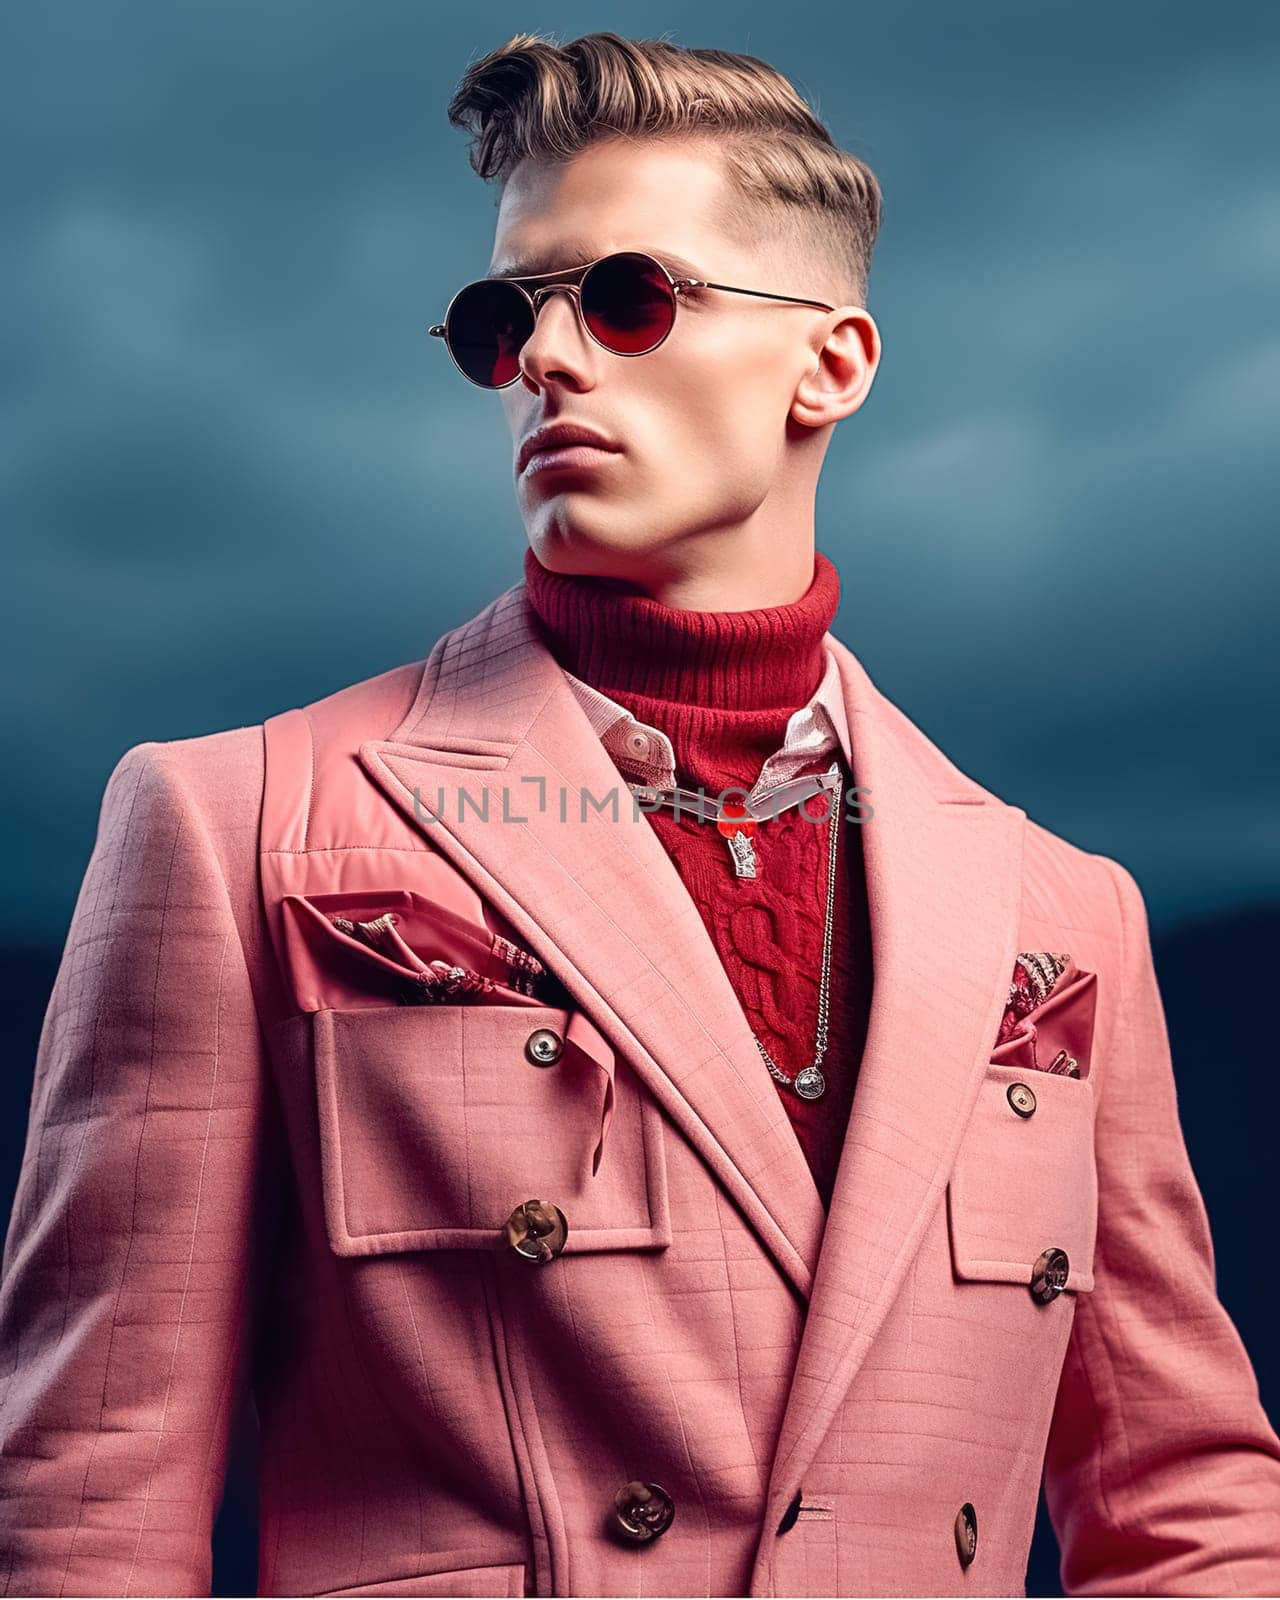 Stylish fashionable blond man in glasses and a pink suit from famous brands. by Yurich32